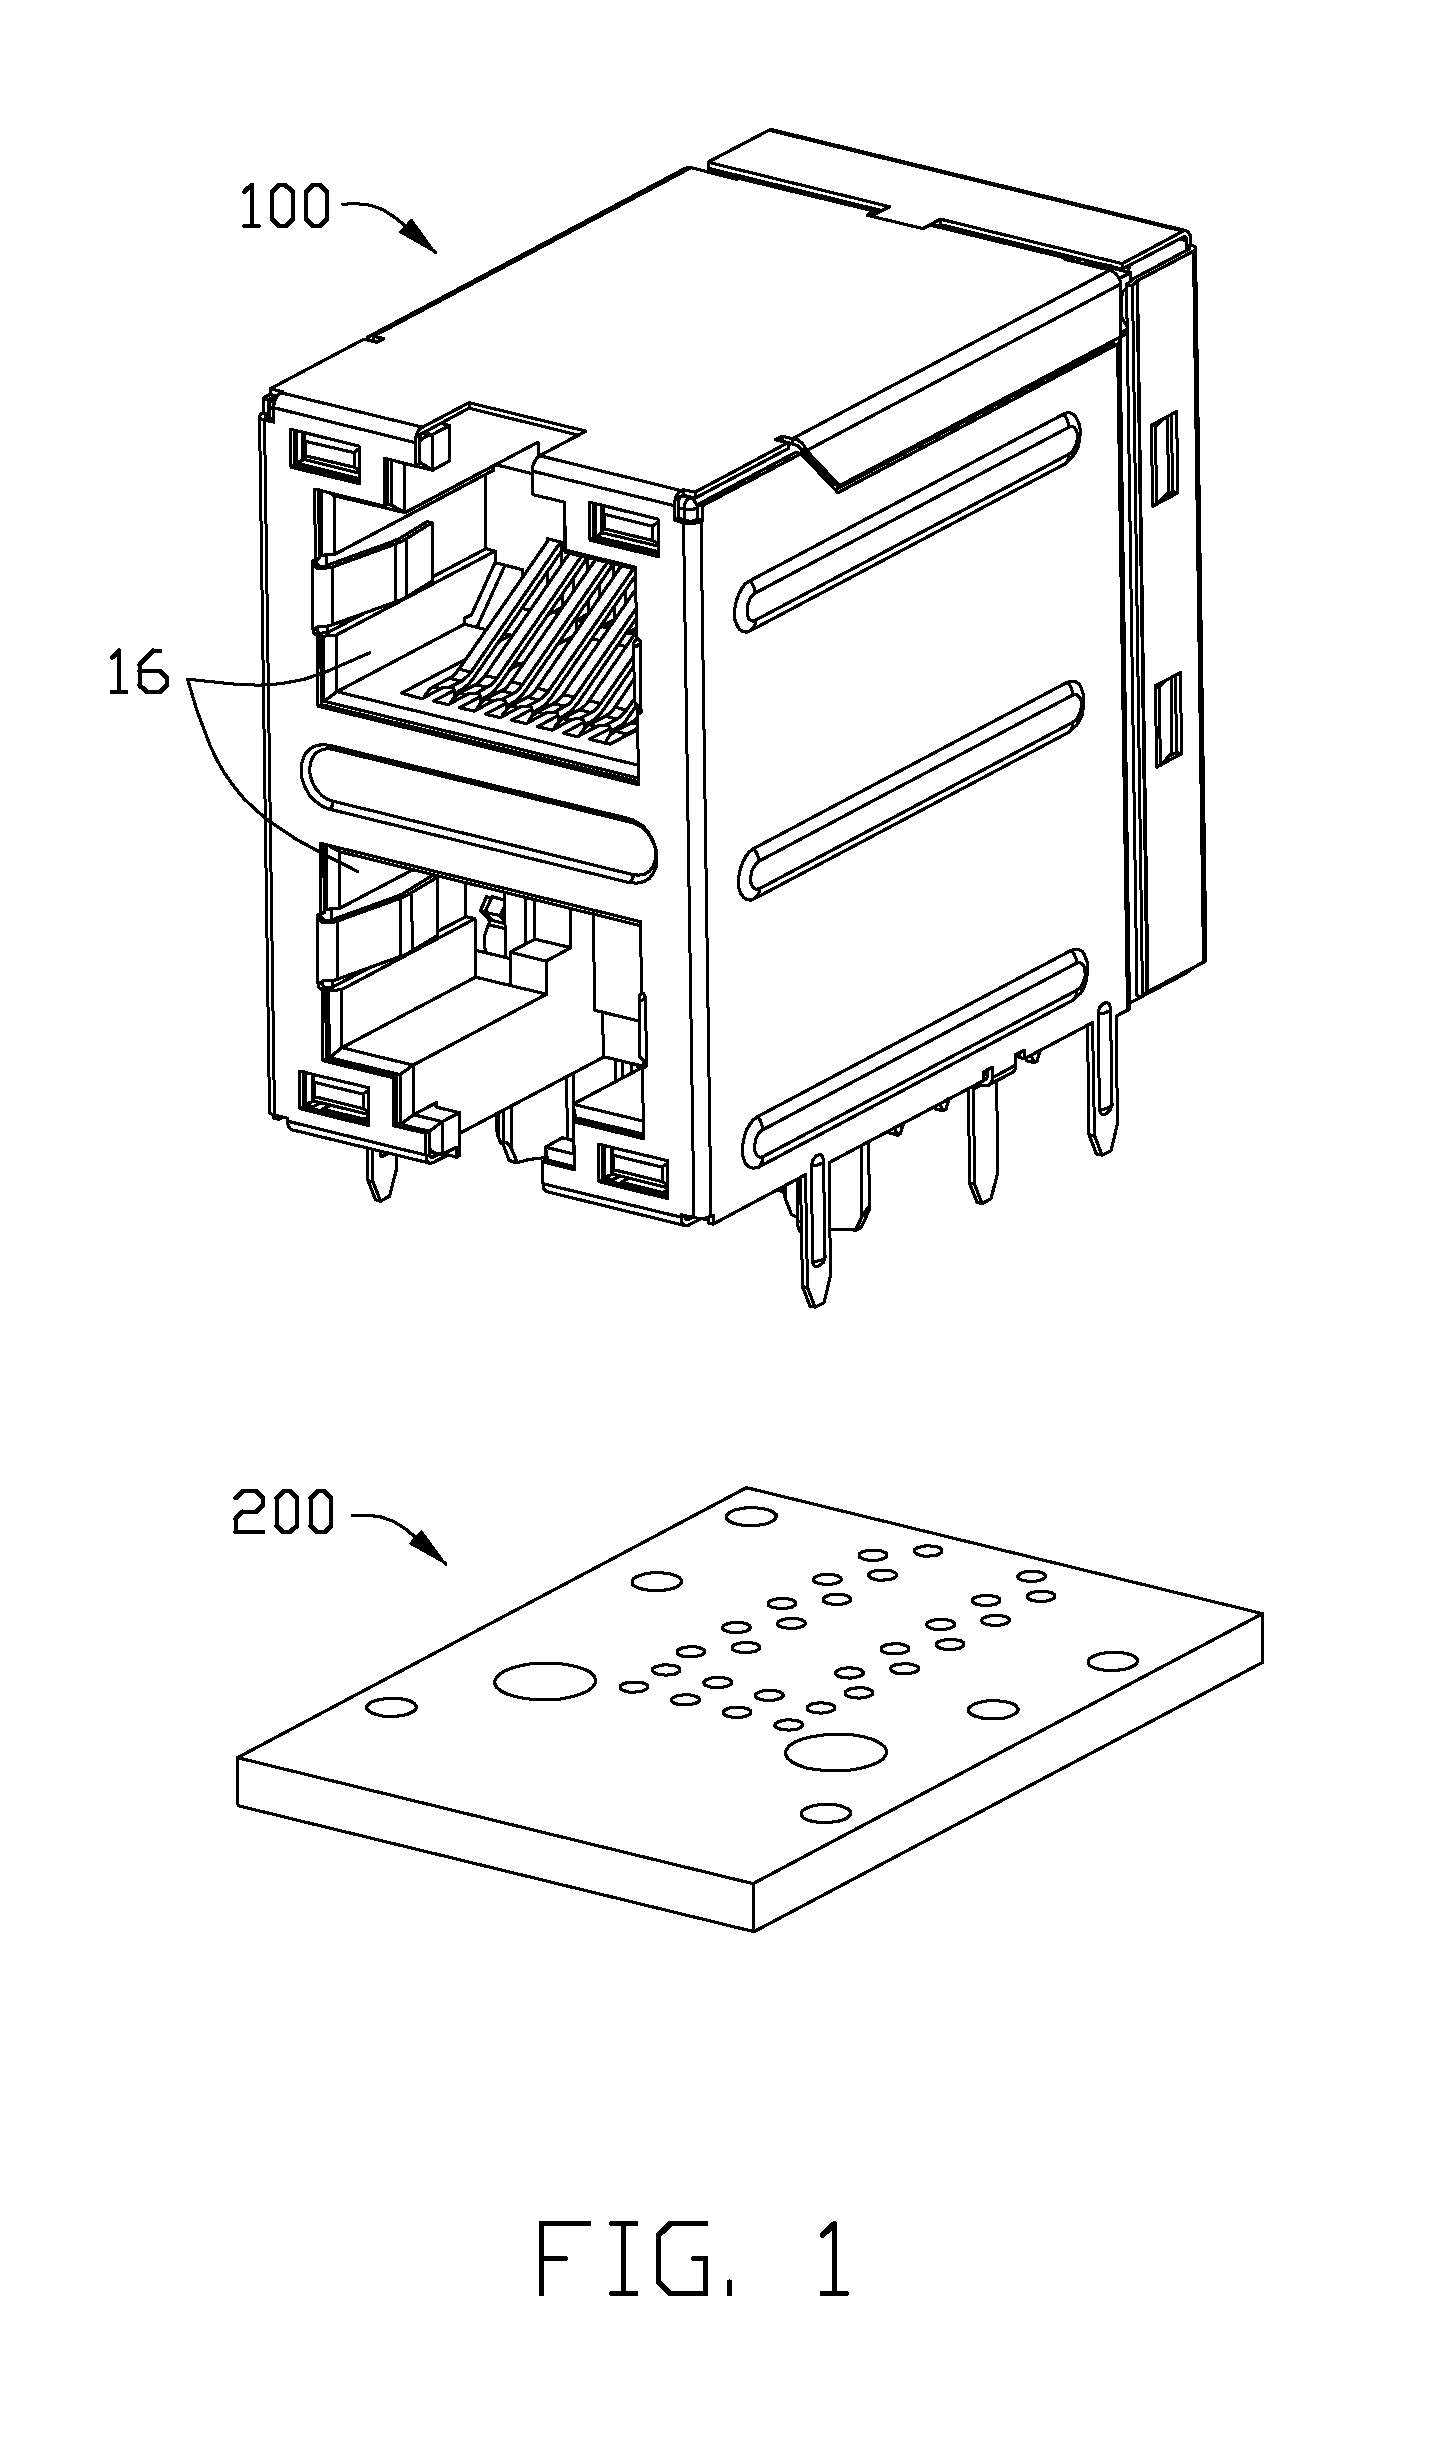 Electrical connector having an improved structure for assembling a contact module to an insulative housing